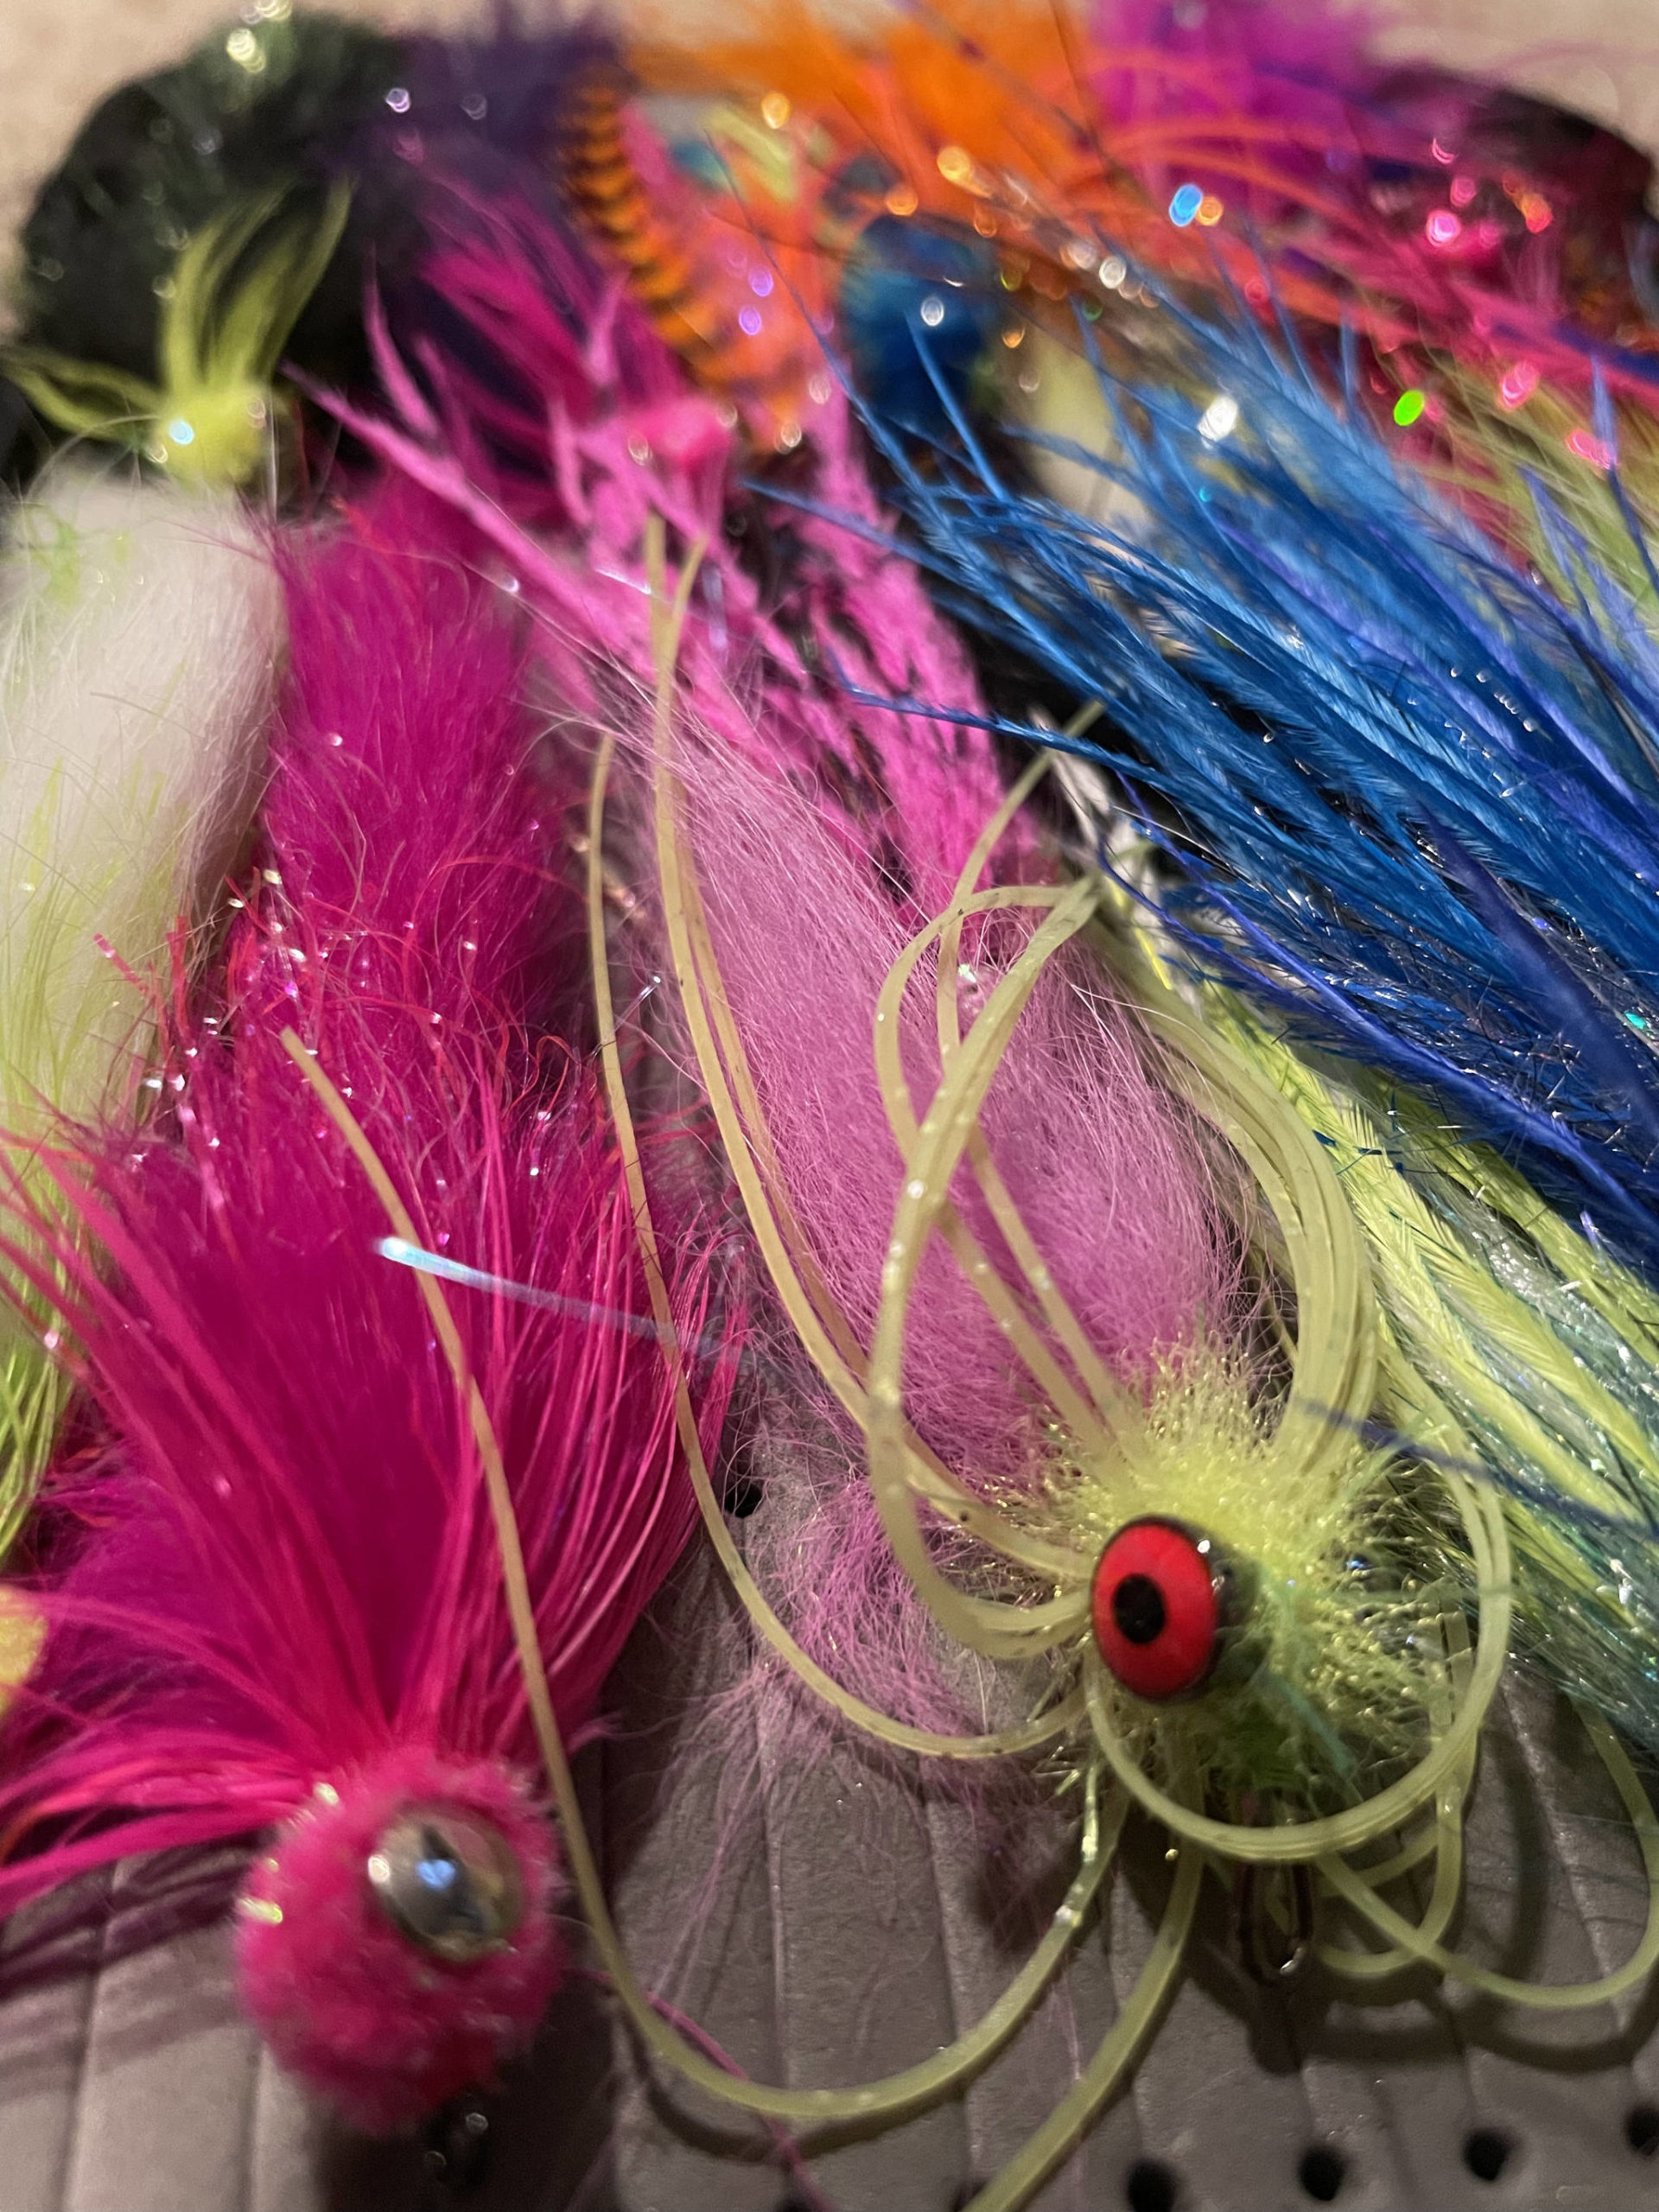 I have flies with barbell eyes, jig heads, cone heads, bead heads and no heads. I have flies with stinger hooks that trail and long-shanked salmon hooks that don’t. I have red, pink, salmon, fuchsia, cerise, purple, orange, flesh, green, olive, chartreuse, white and black flies made of feathers, chenille, hackle, marabou, flashabou and silicone. (Jeff Lund / For the Juneau Empire)